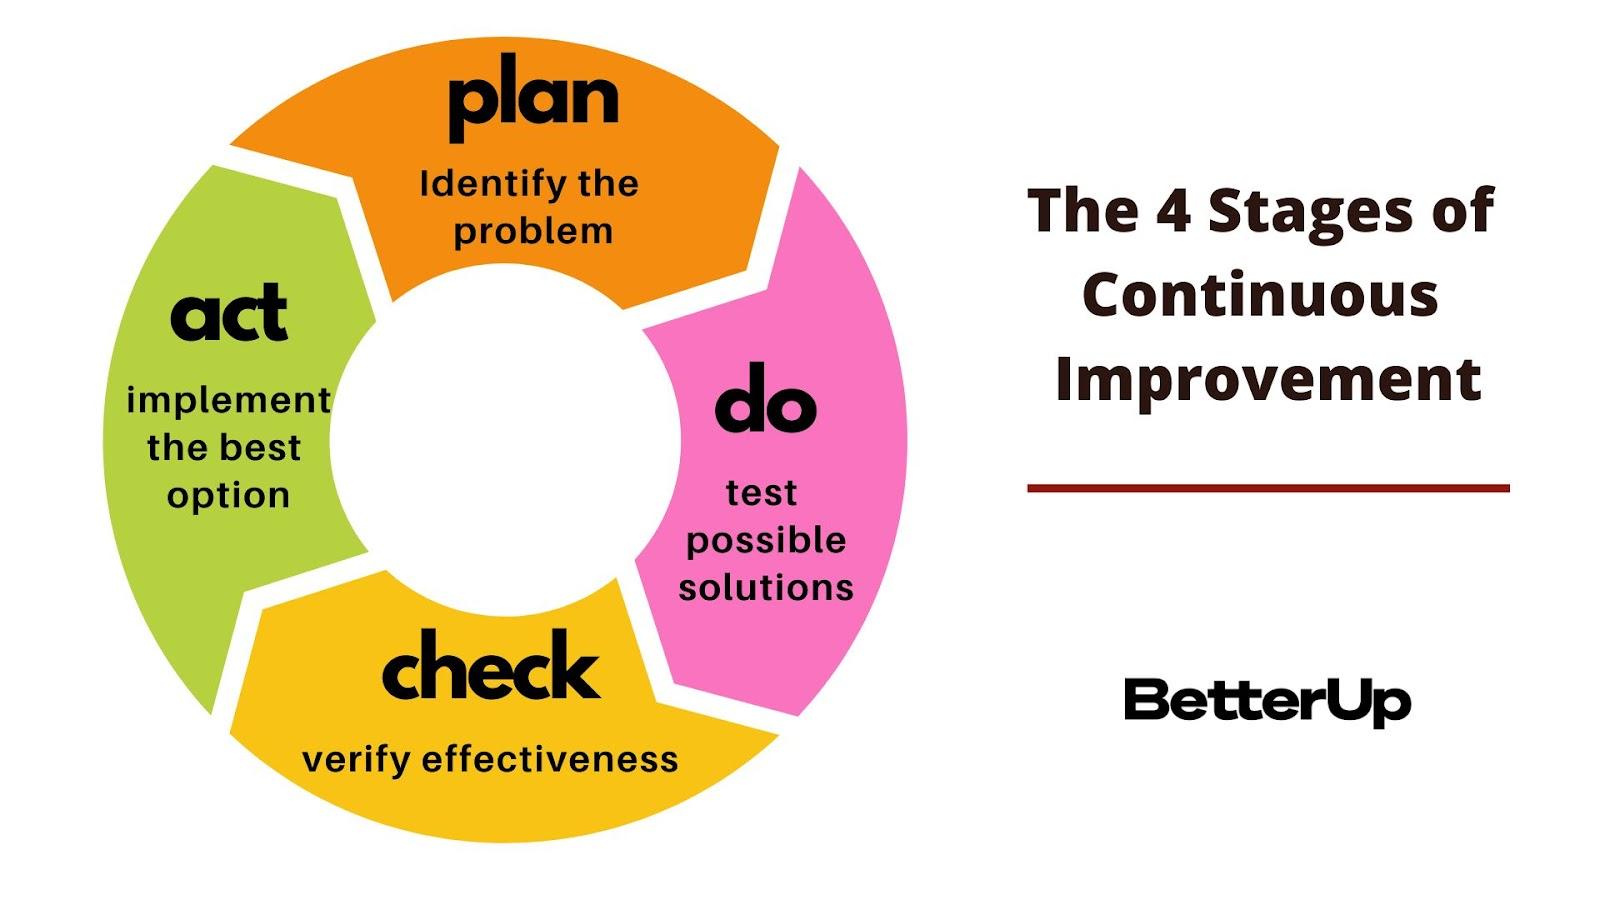 what is the purpose of continuous improvement how would this be reflected in a business plan